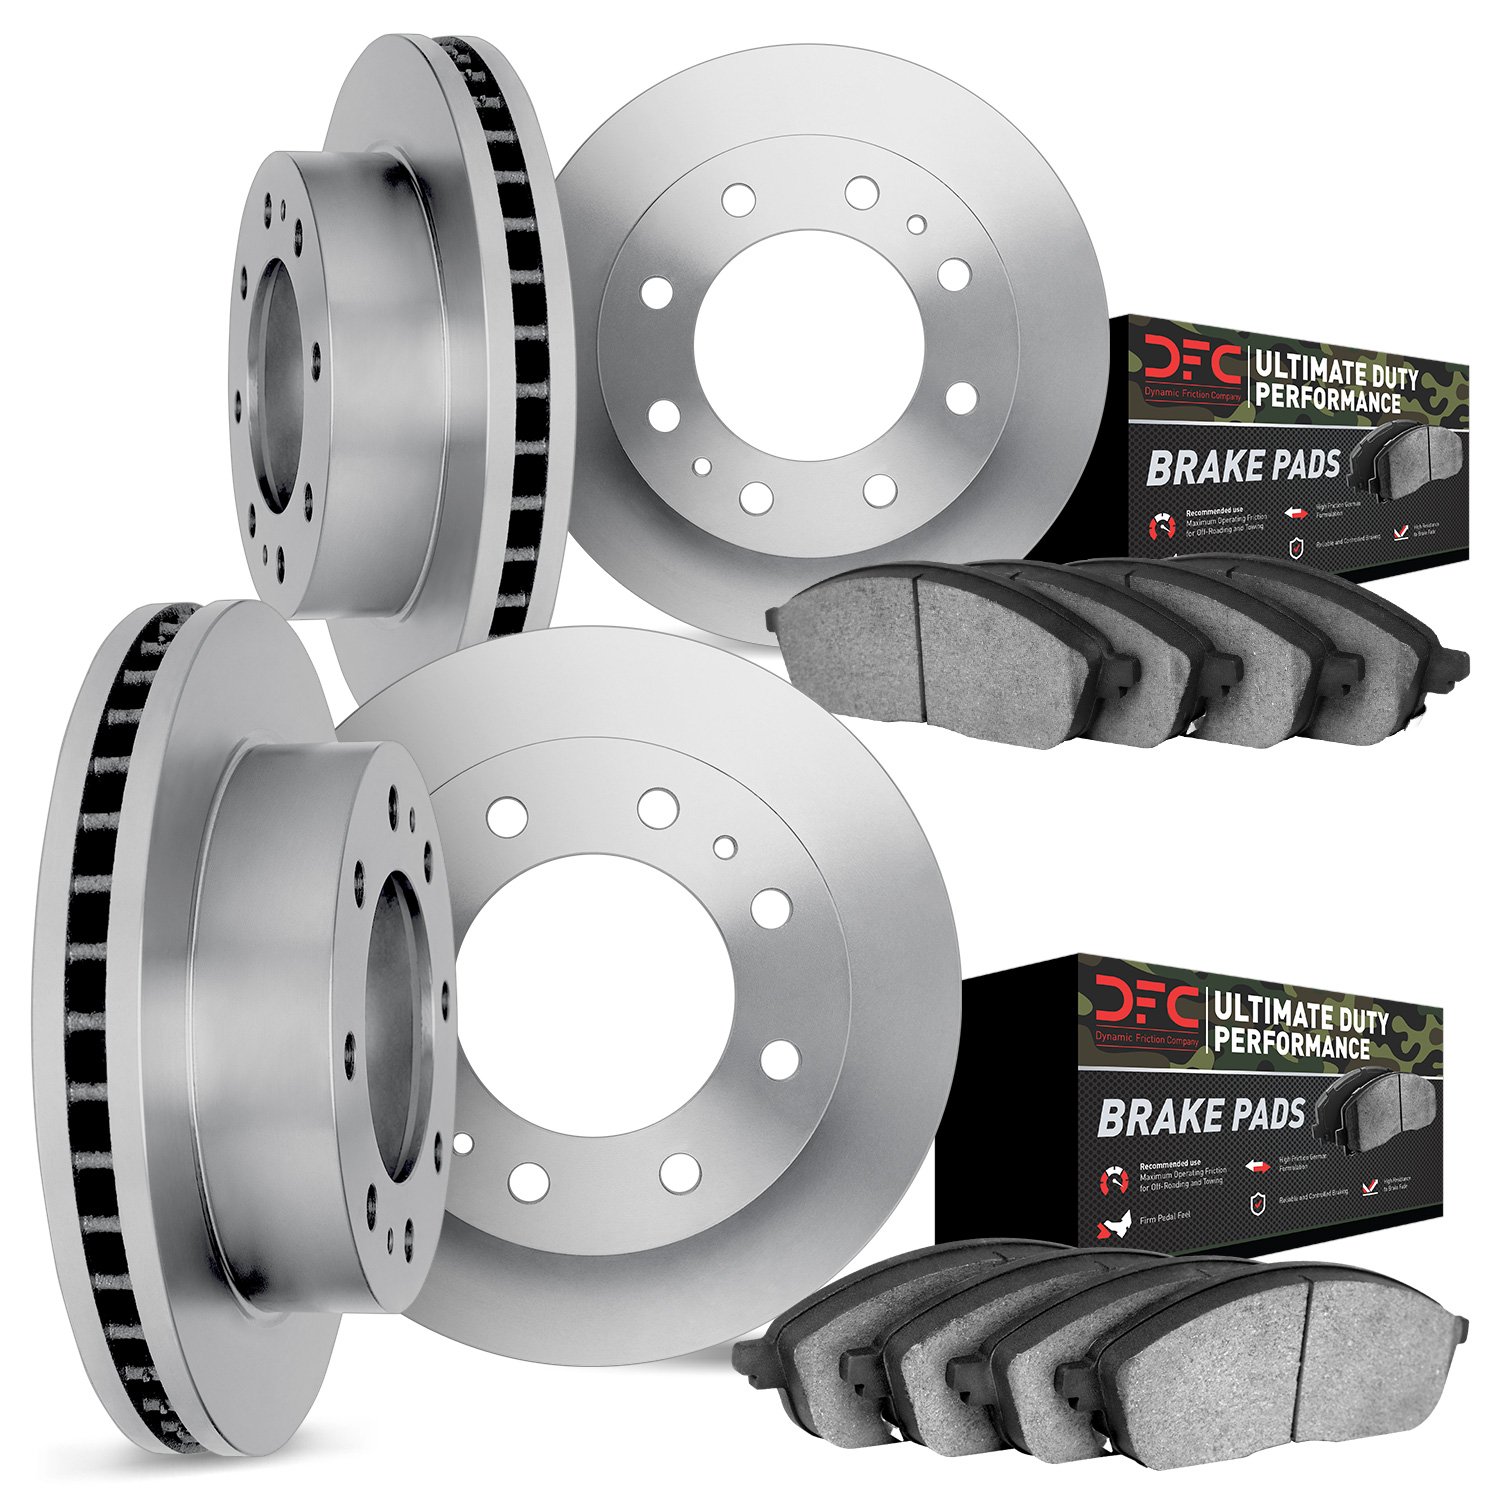 6404-46005 Brake Rotors with Ultimate-Duty Brake Pads, 2006-2011 GM, Position: Front and Rear